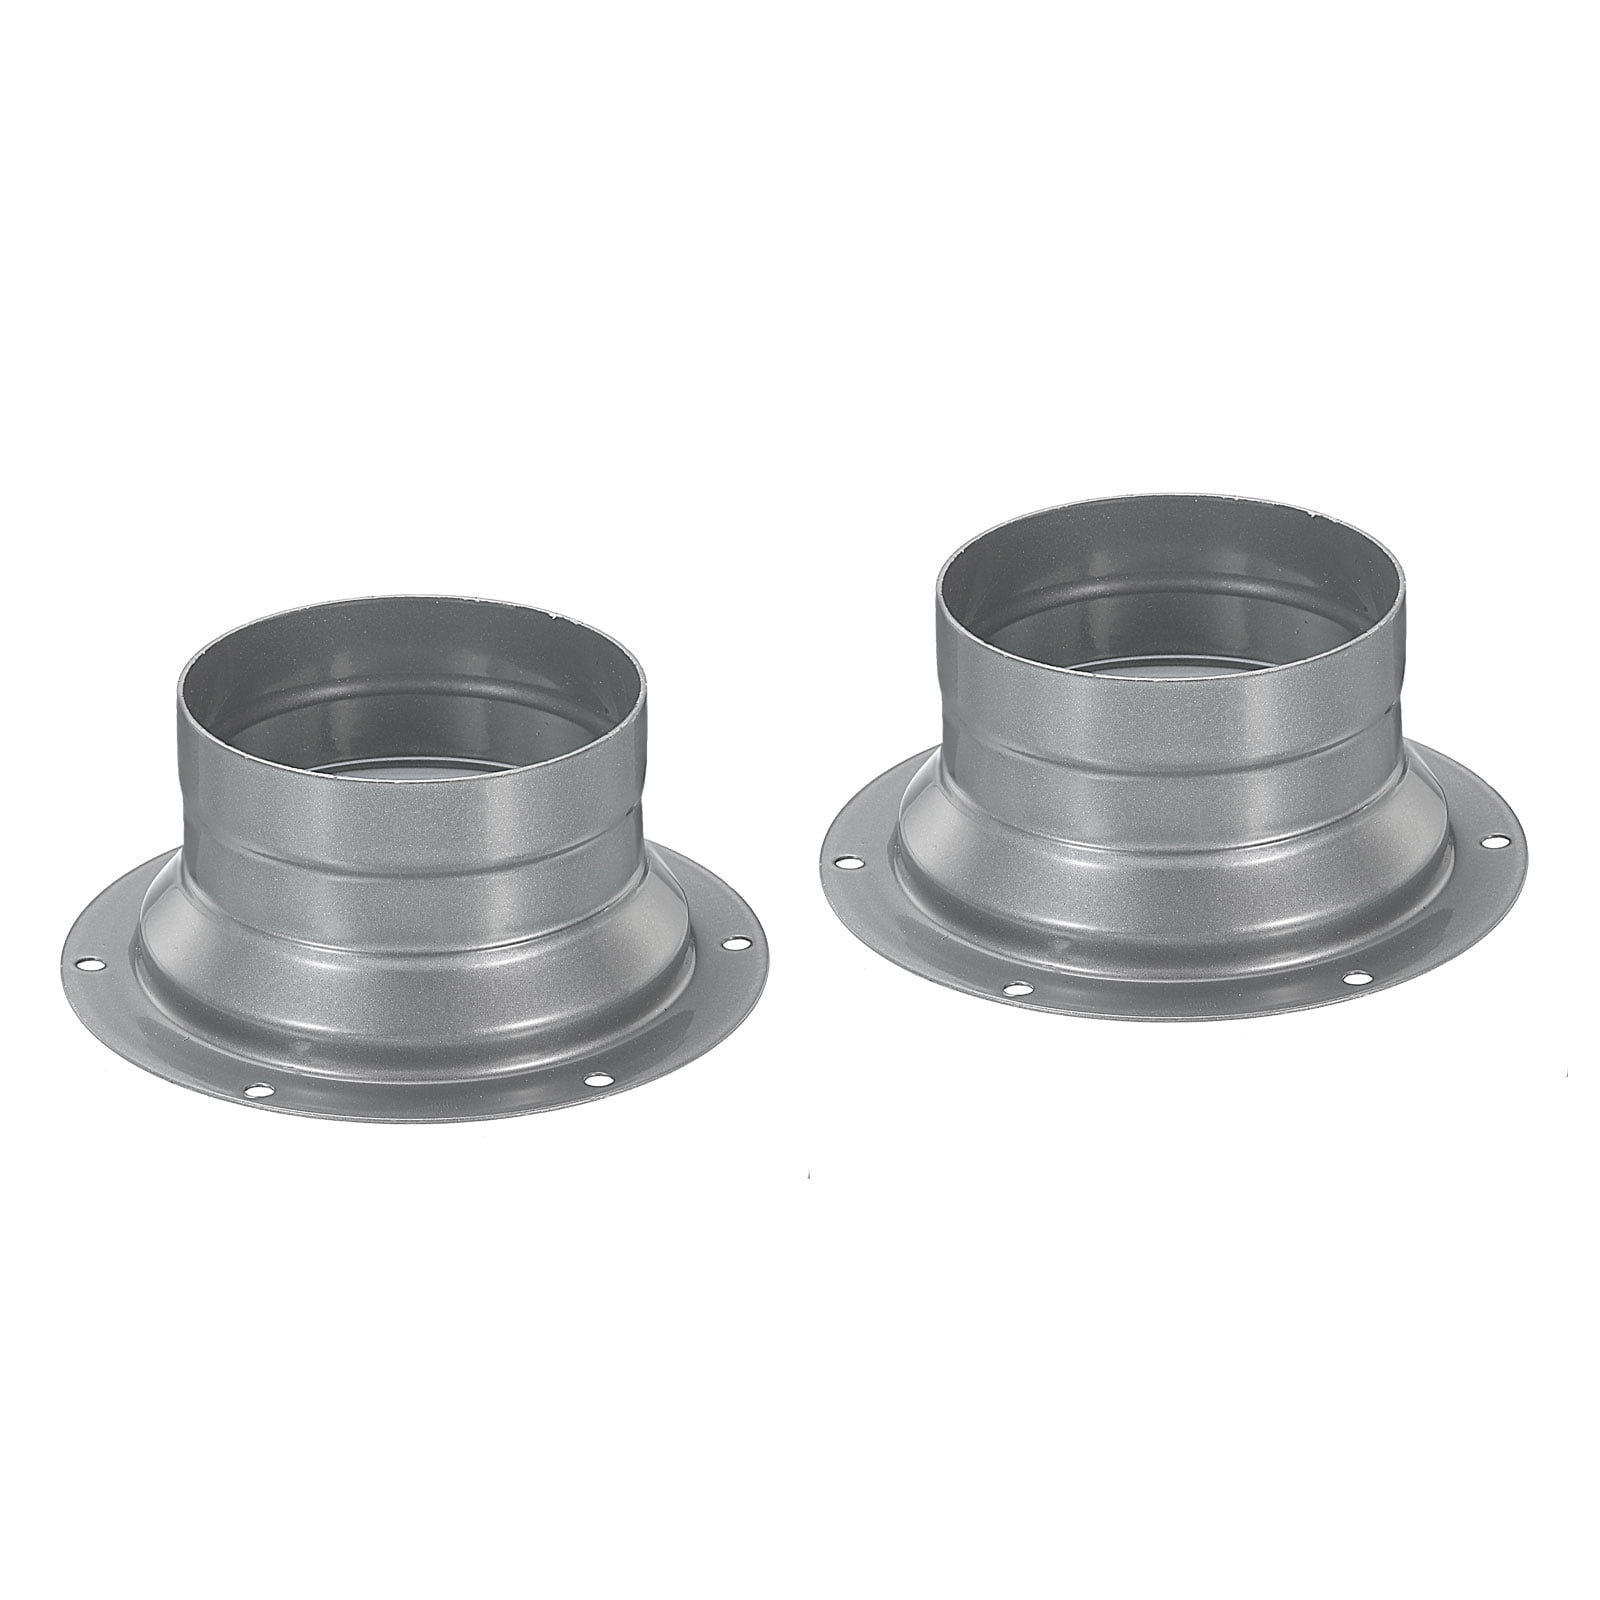 Uxcell 3 Inch Duct Connectors Flange Metal Fitting Straight Pipe